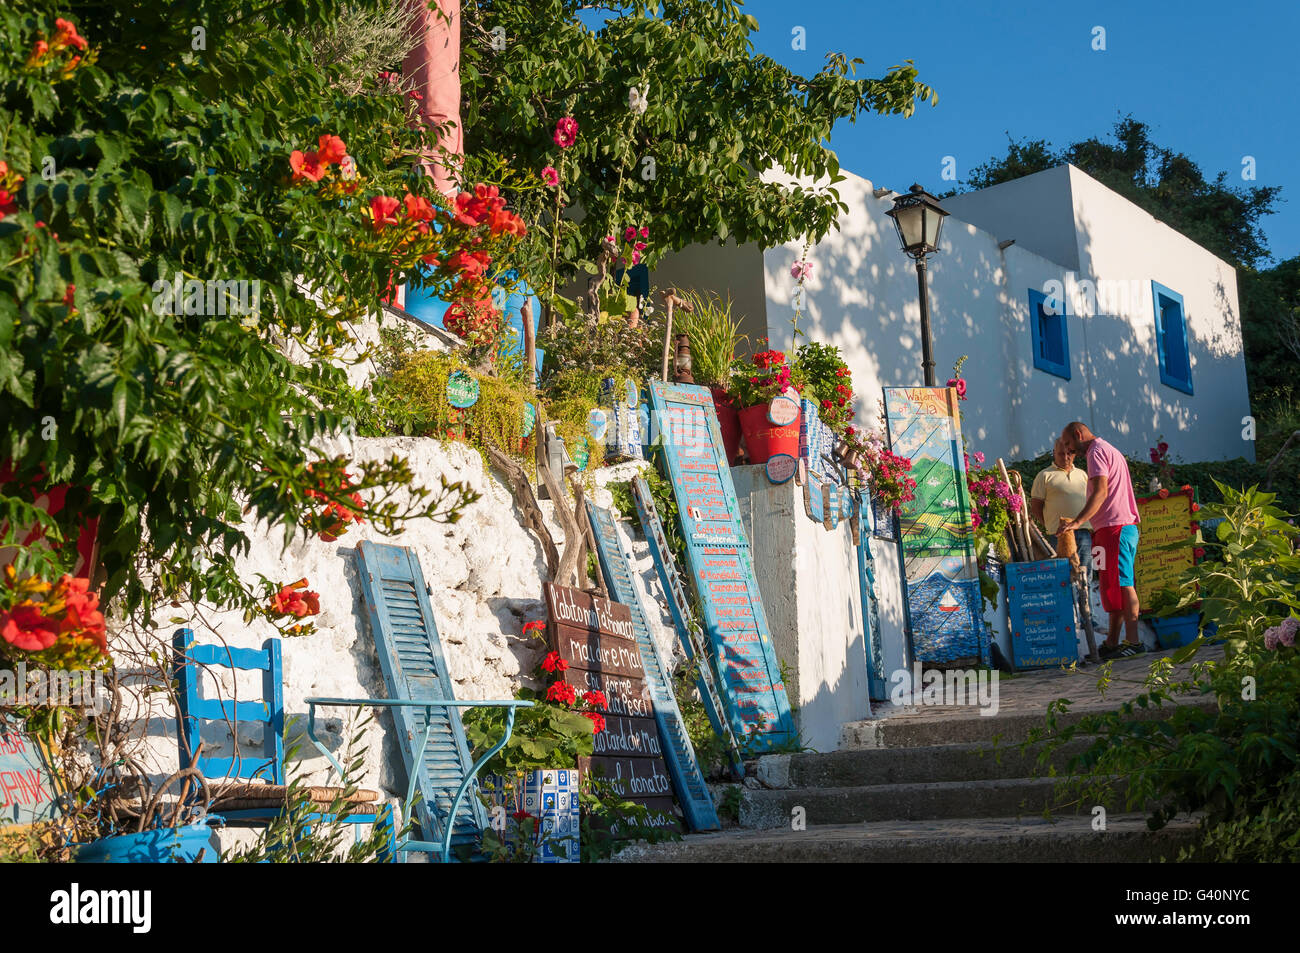 The Watermill of Zia Taverna in hillside village of Zia, Kos (Cos), The Dodecanese, South Aegean Region, Greec Stock Photo